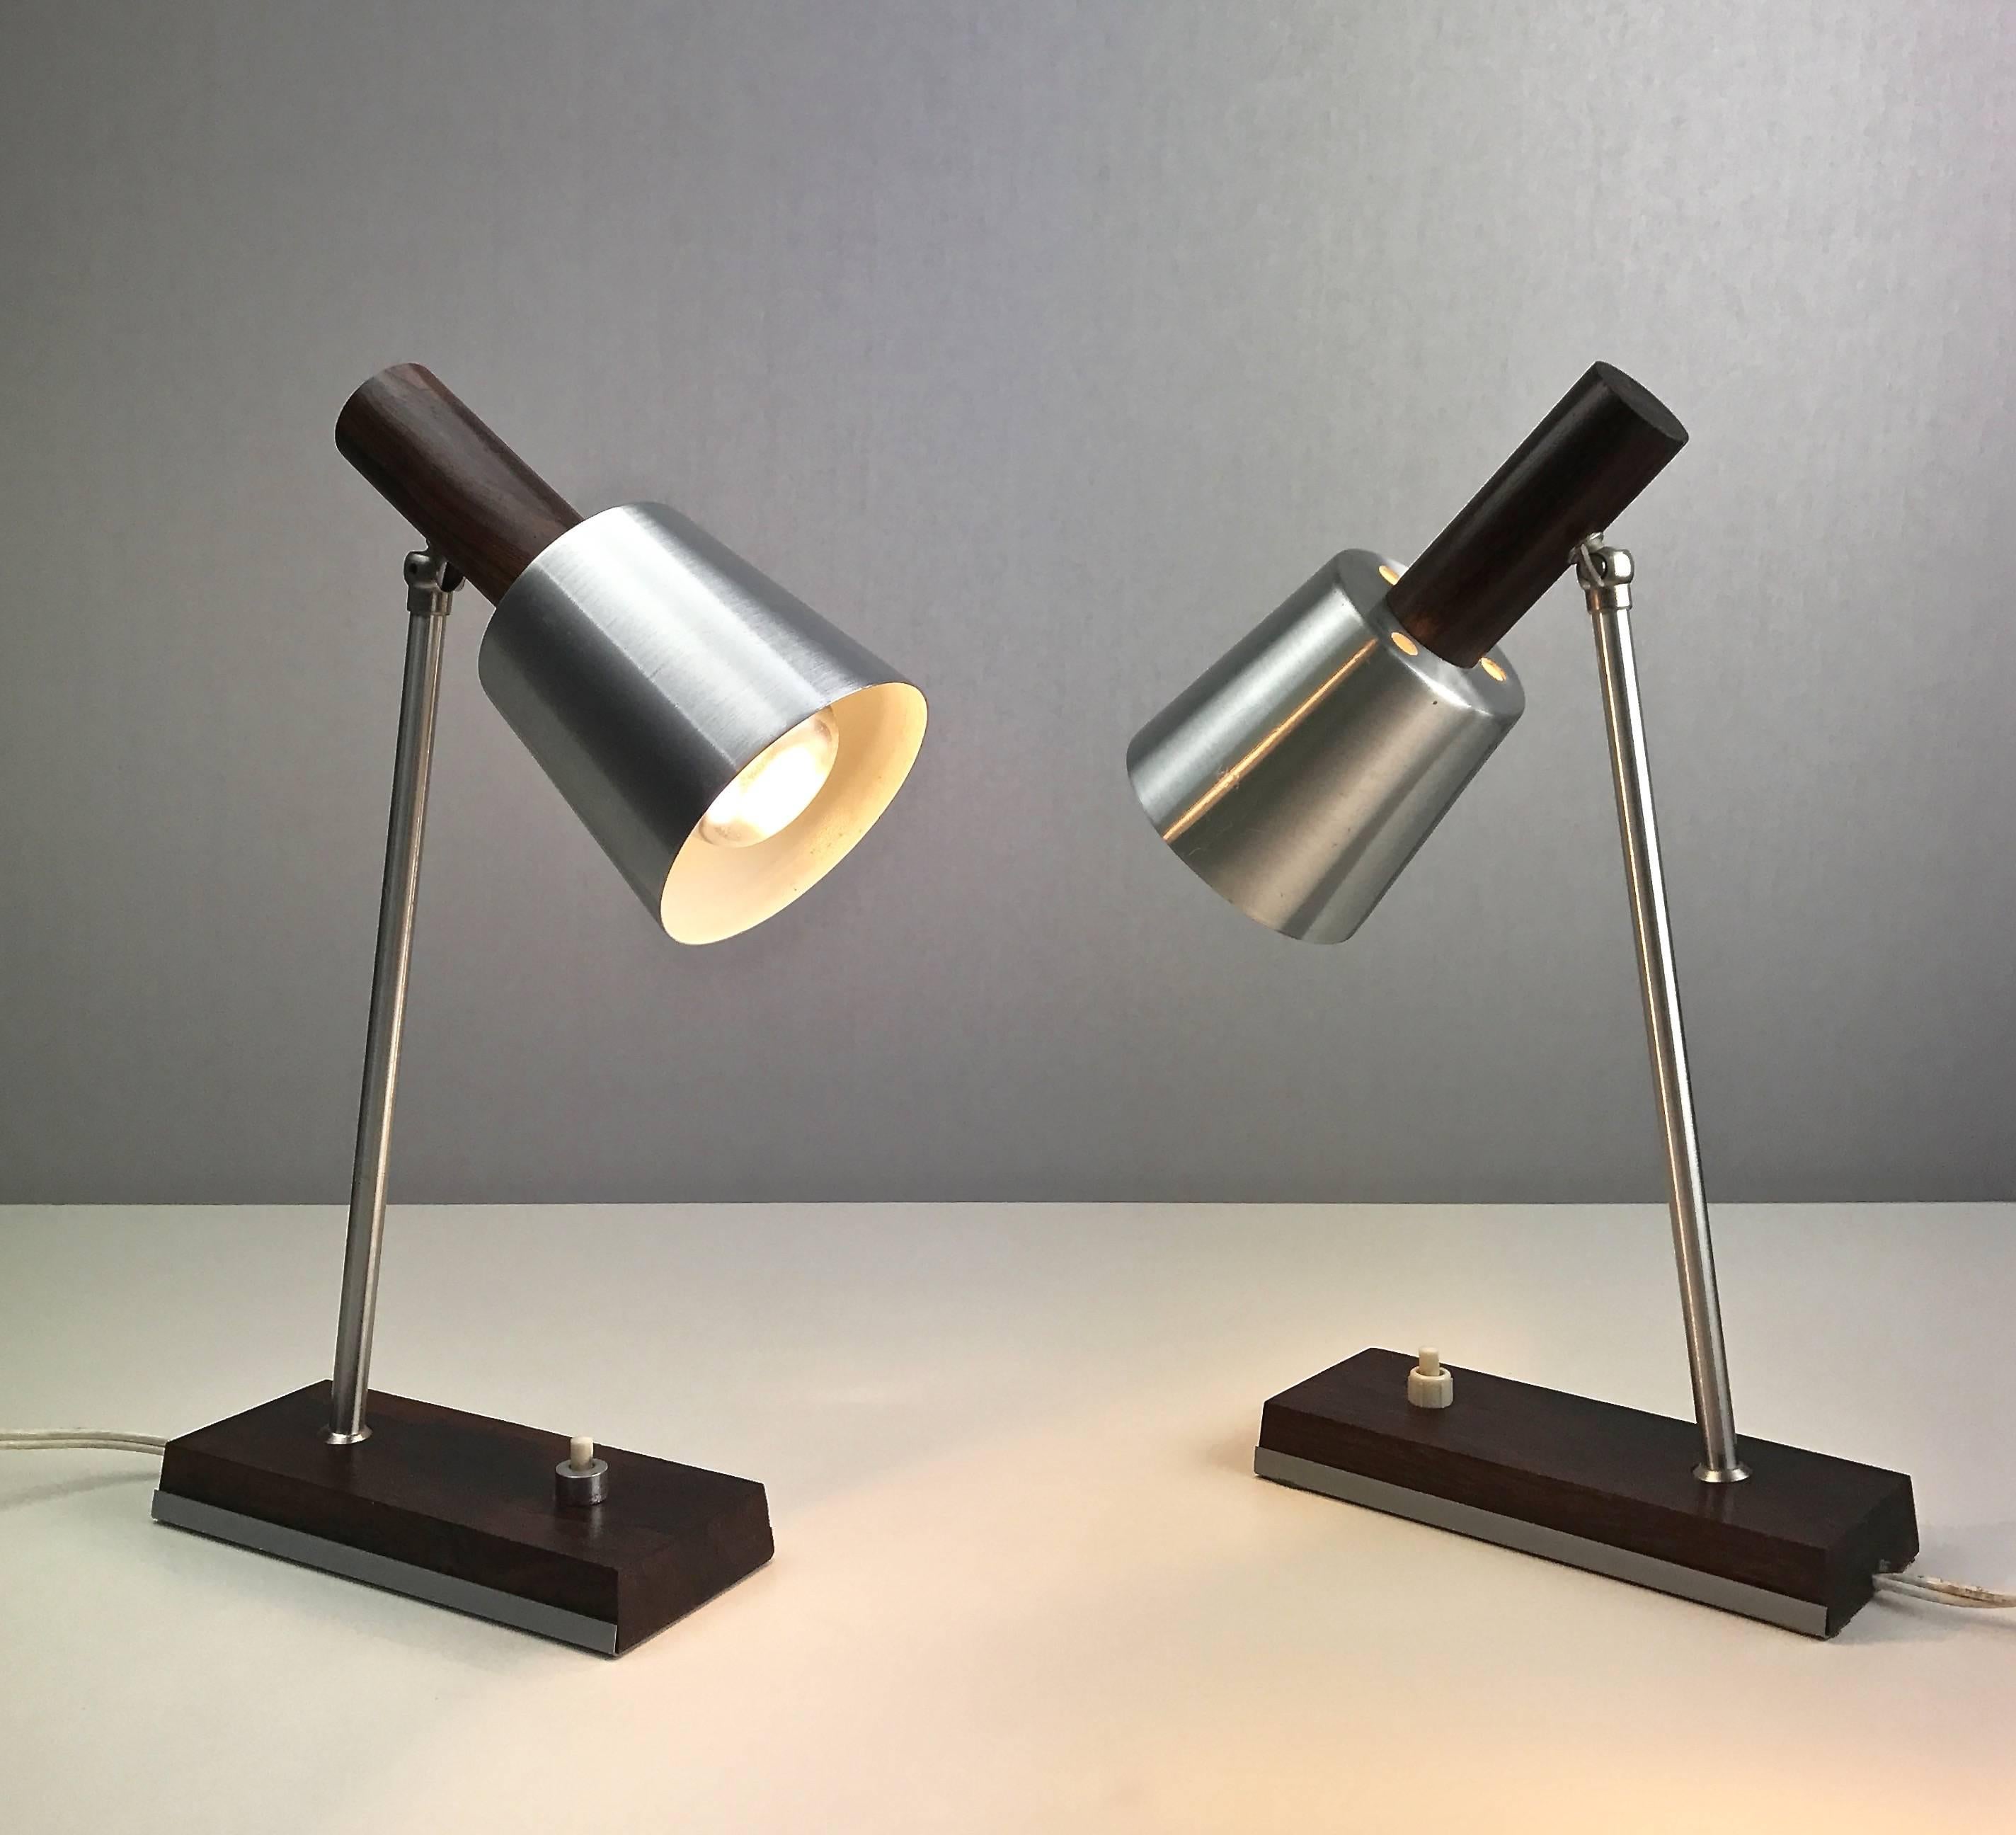 Amazing table lamps Silva from Lyfa, 1972.

The lights consists of brushed aluminium shade combined with genuine solid rosewood base and back part of the shade. 

Condition: Close to mint condition.

Light source: E14 / E12 edison screw